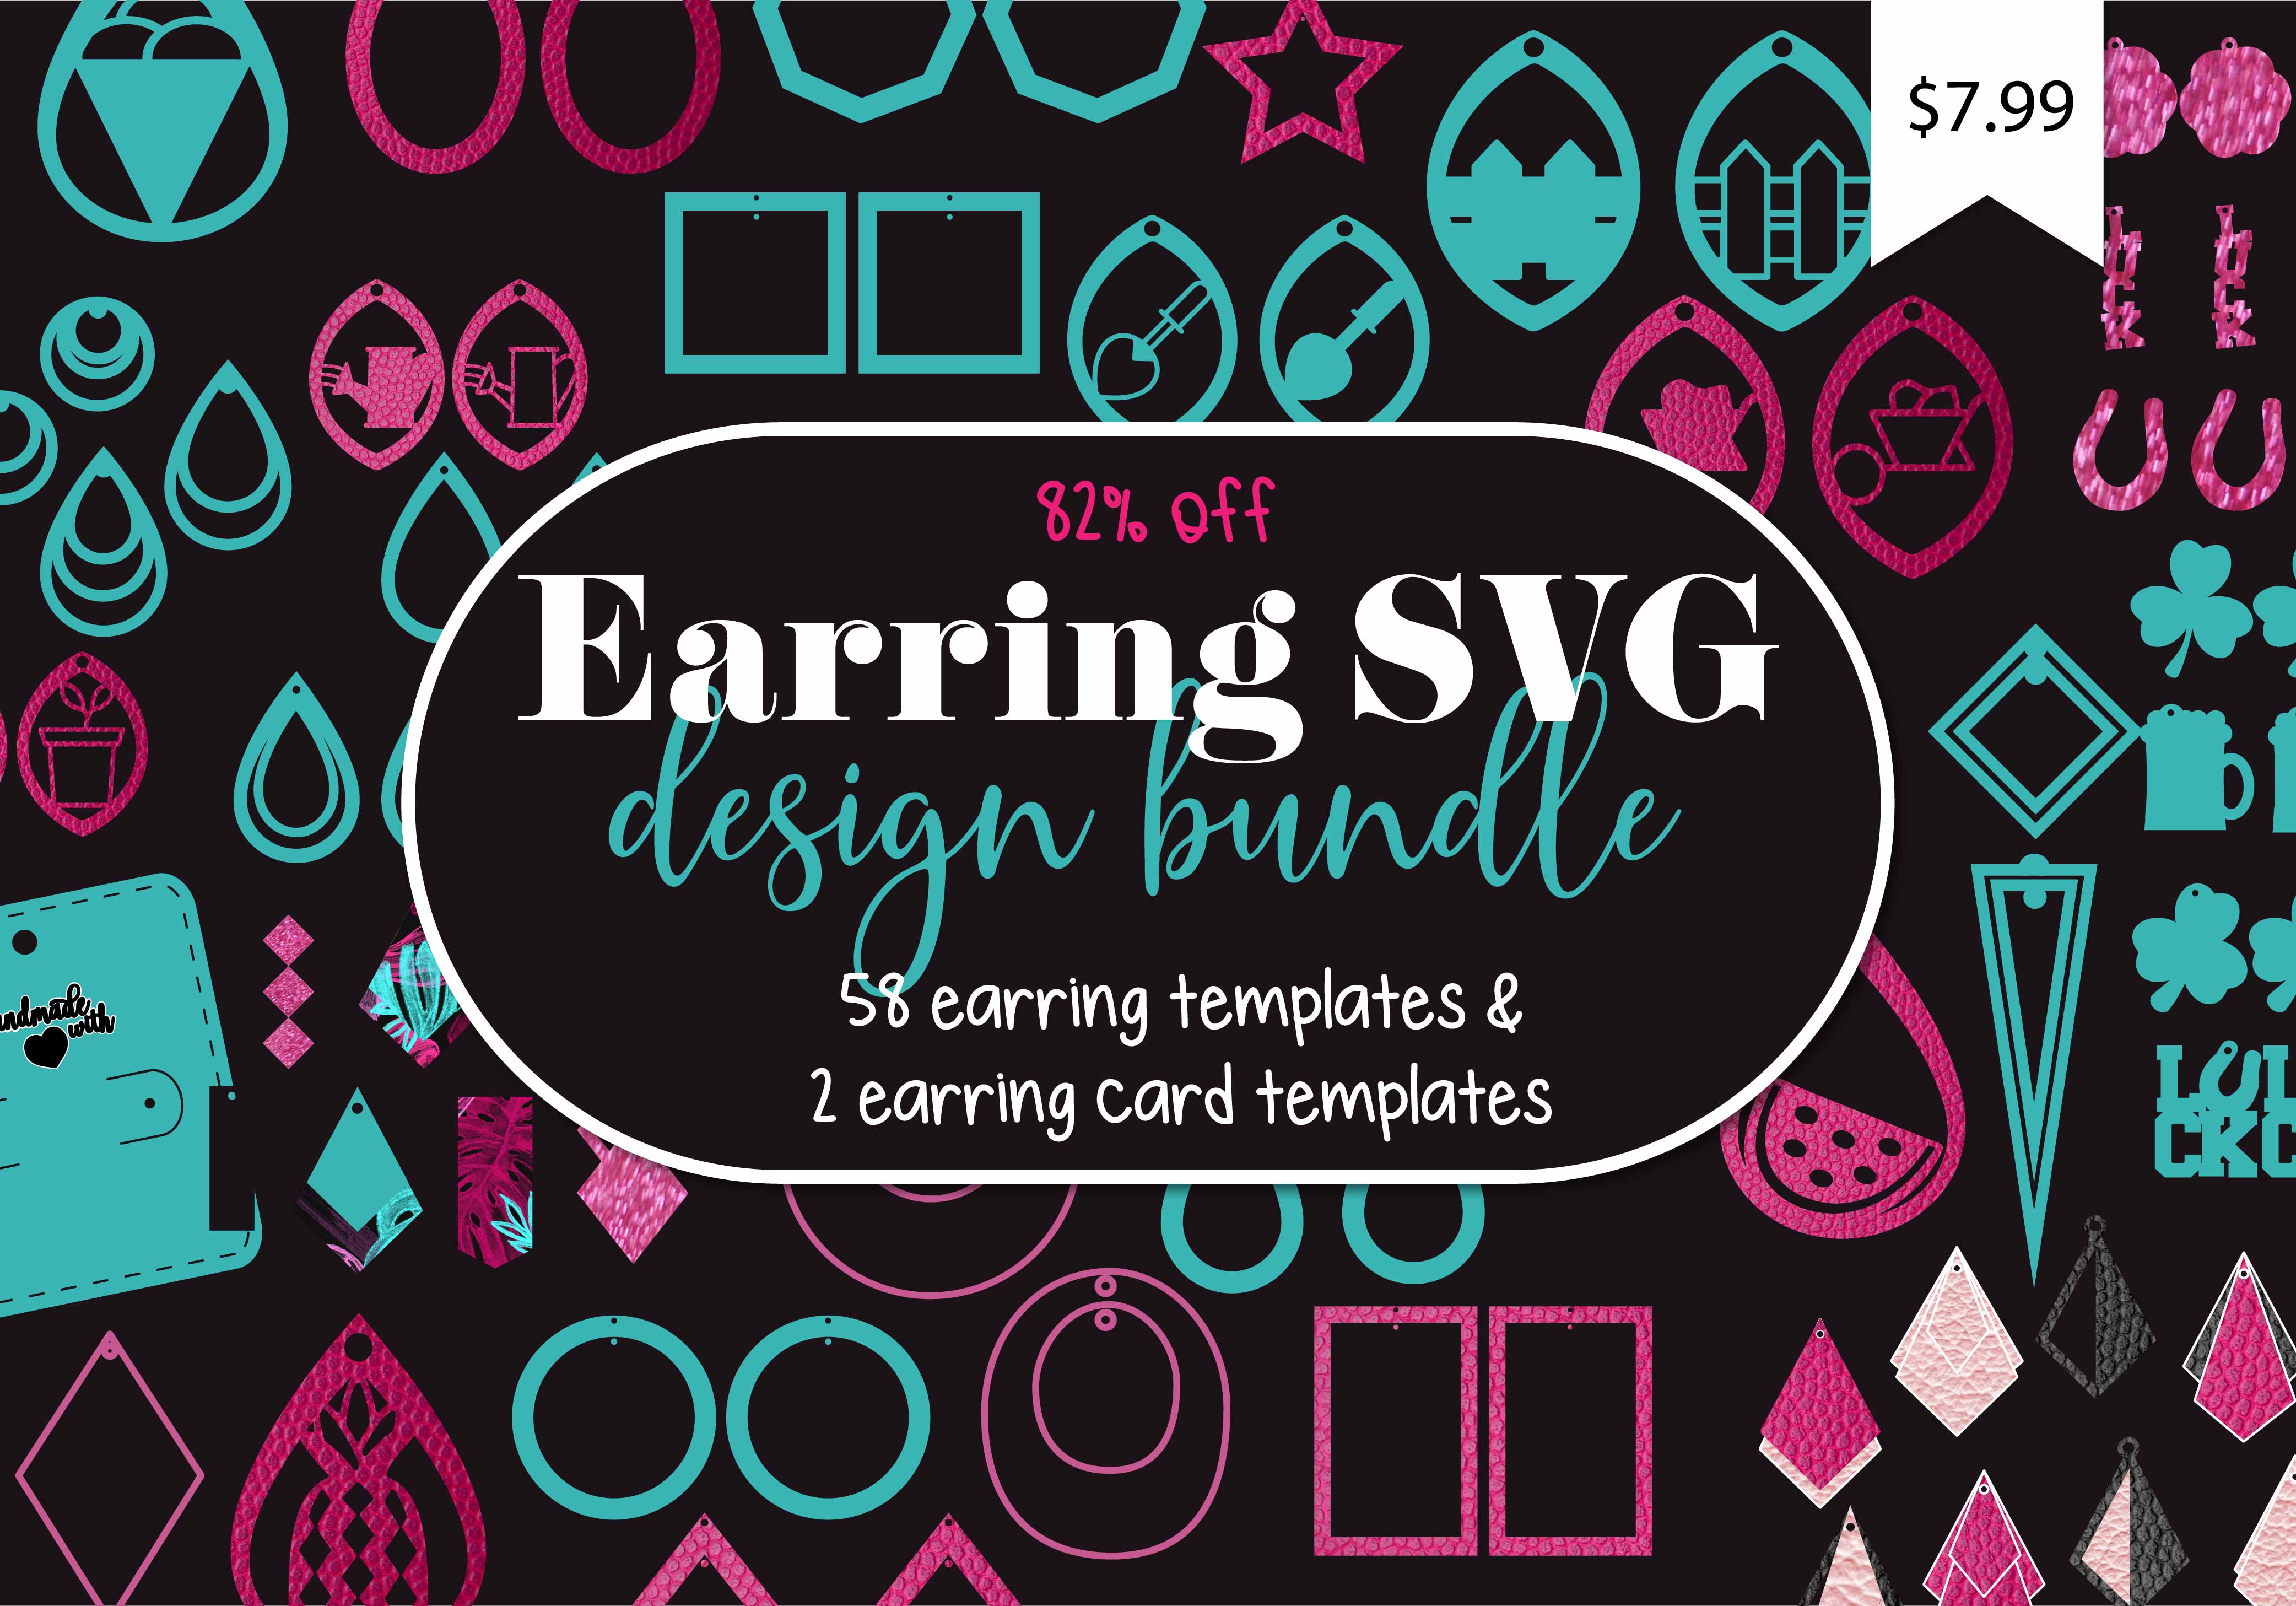 Download Earring Templates Bundle All Files In My Shop Svg Dxf File Instant Download Silhouette Cameo Cricut Downloads Clip Art Commercial Use Stencils Craft Supplies Tools Deshpandefoundationindia Org